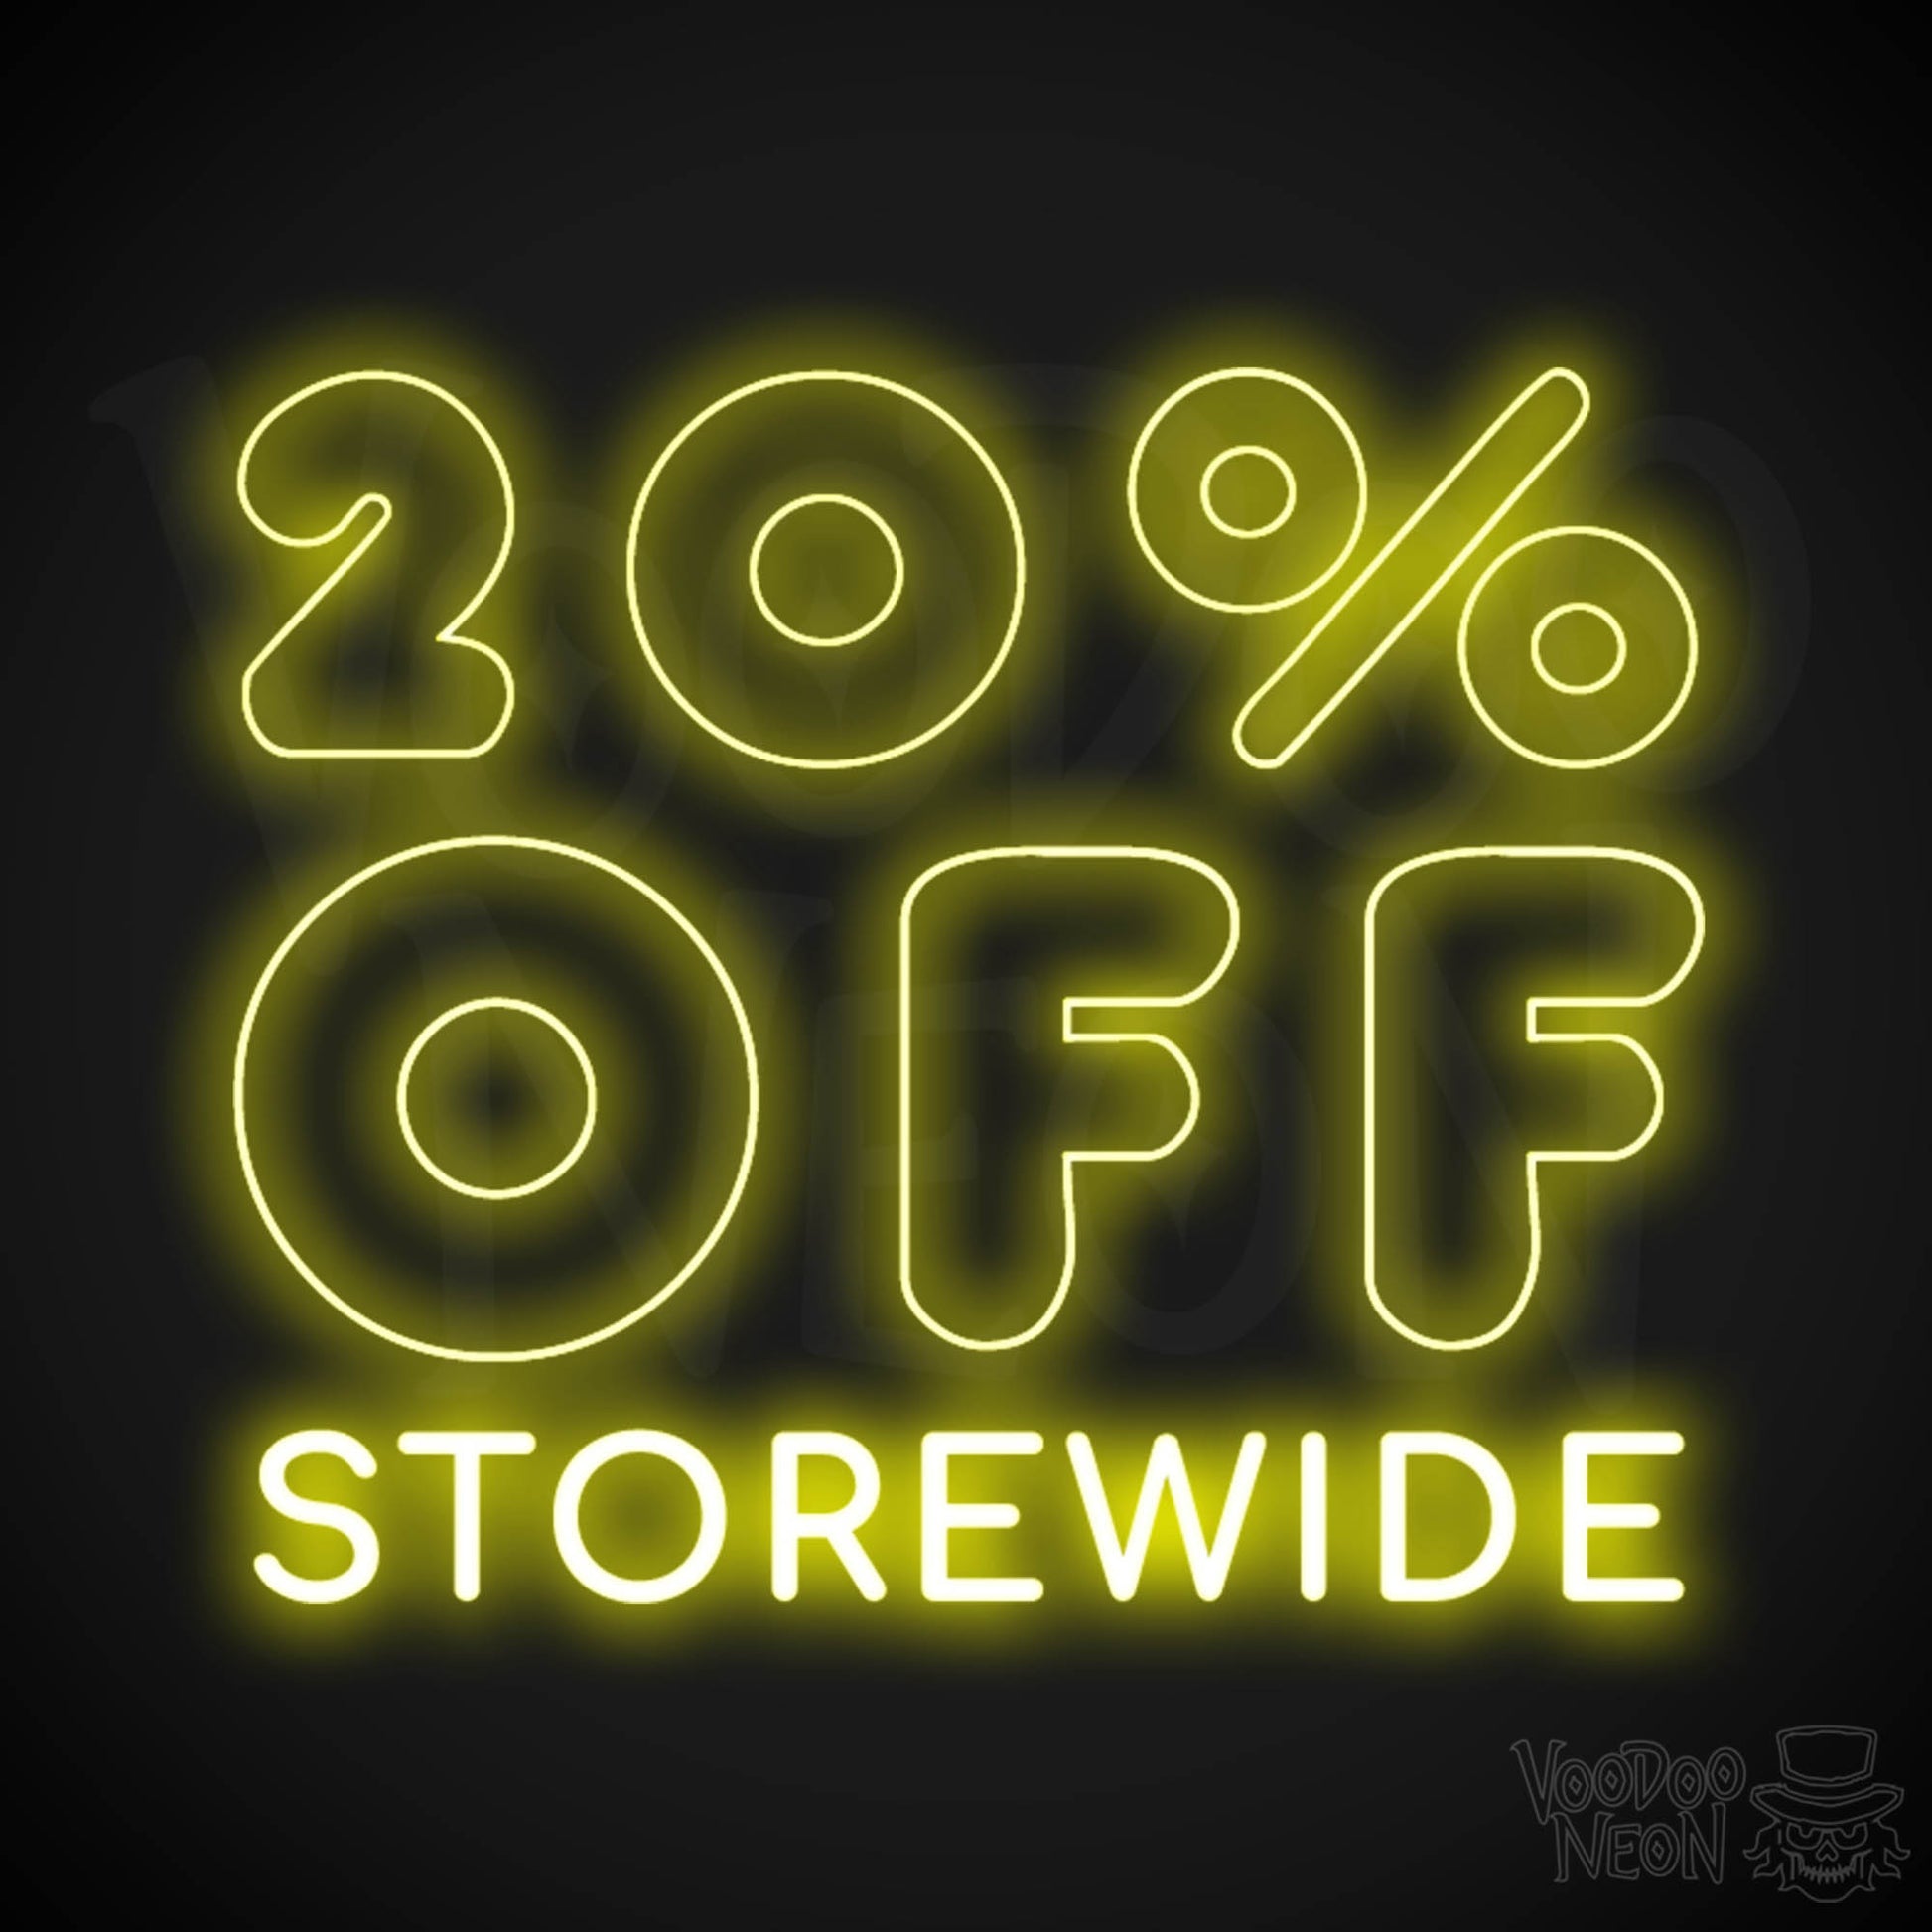 20% Off Storewide Neon Sign - 20% Off Storewide Sign - LED Shop Sign - Color Yellow